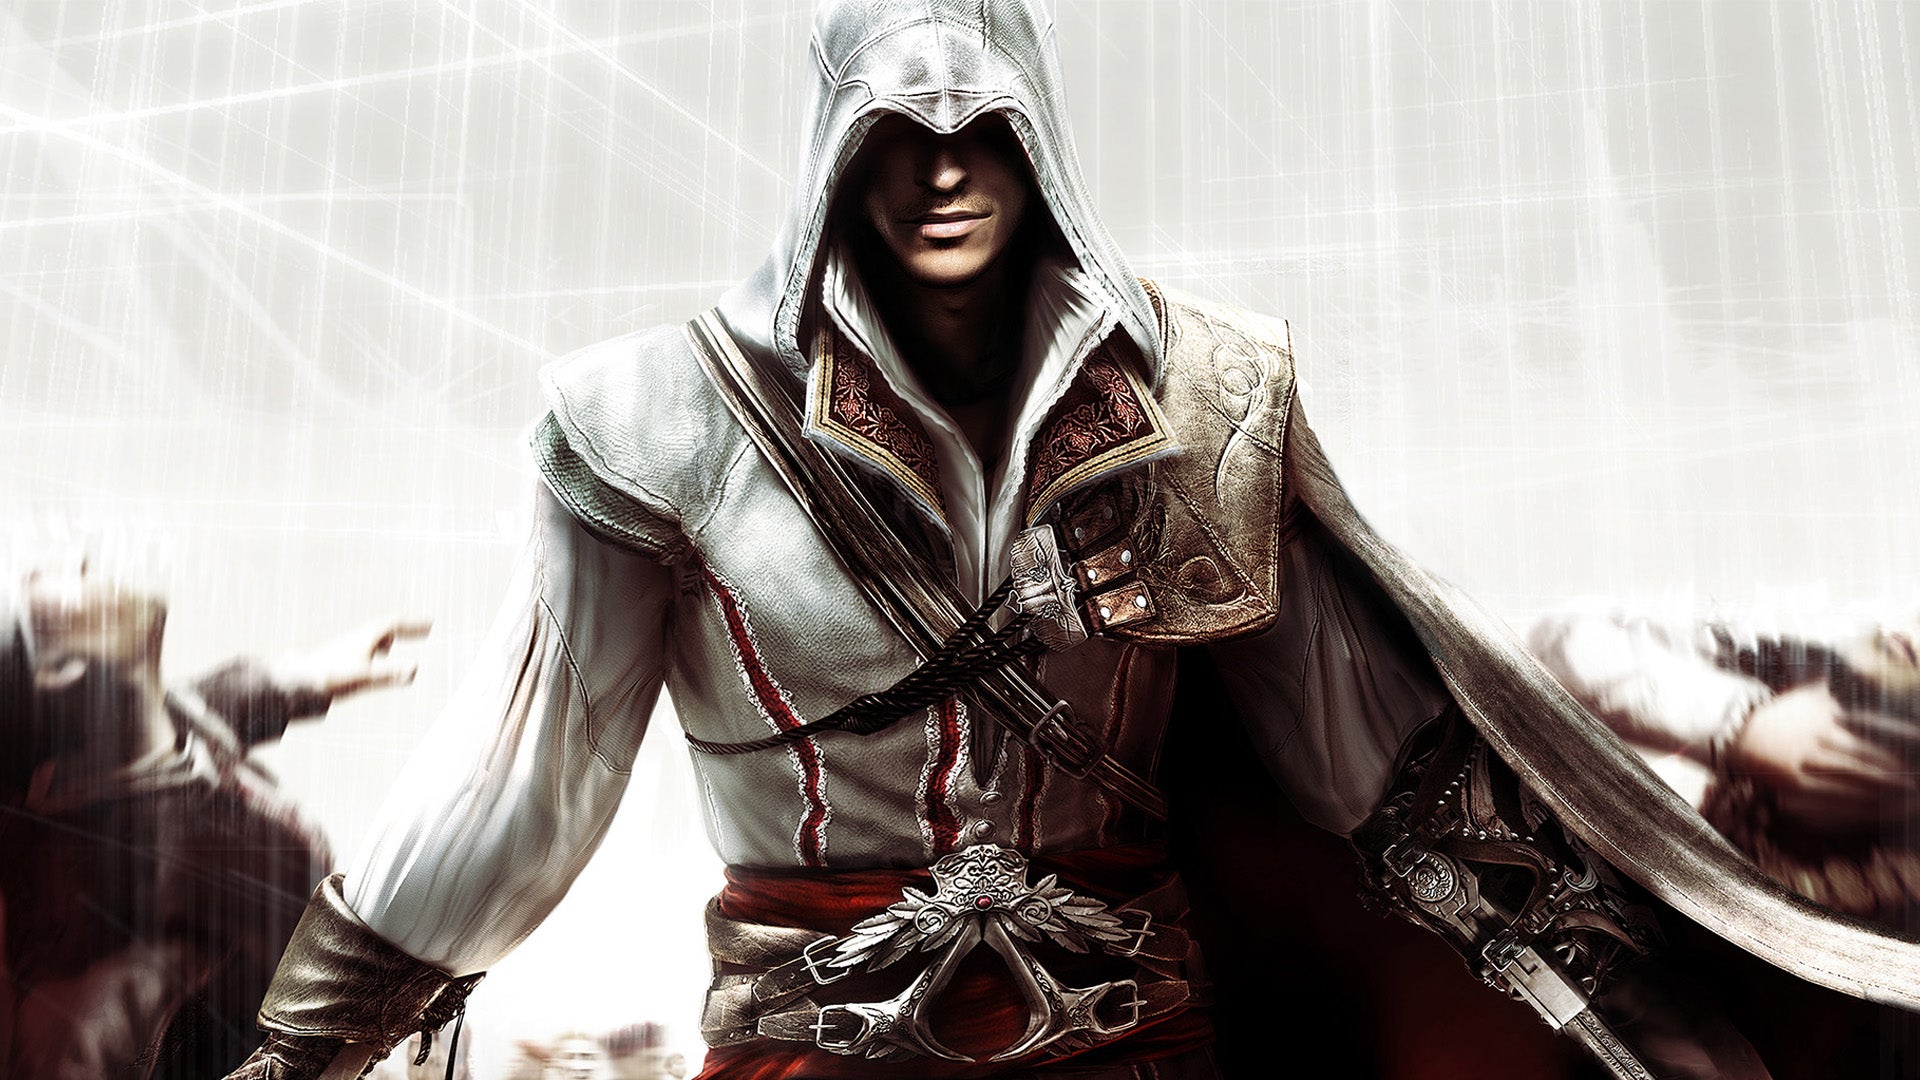 Ubisoft is shutting down online services for titles like Assassin's Creed 2 and more - VG247